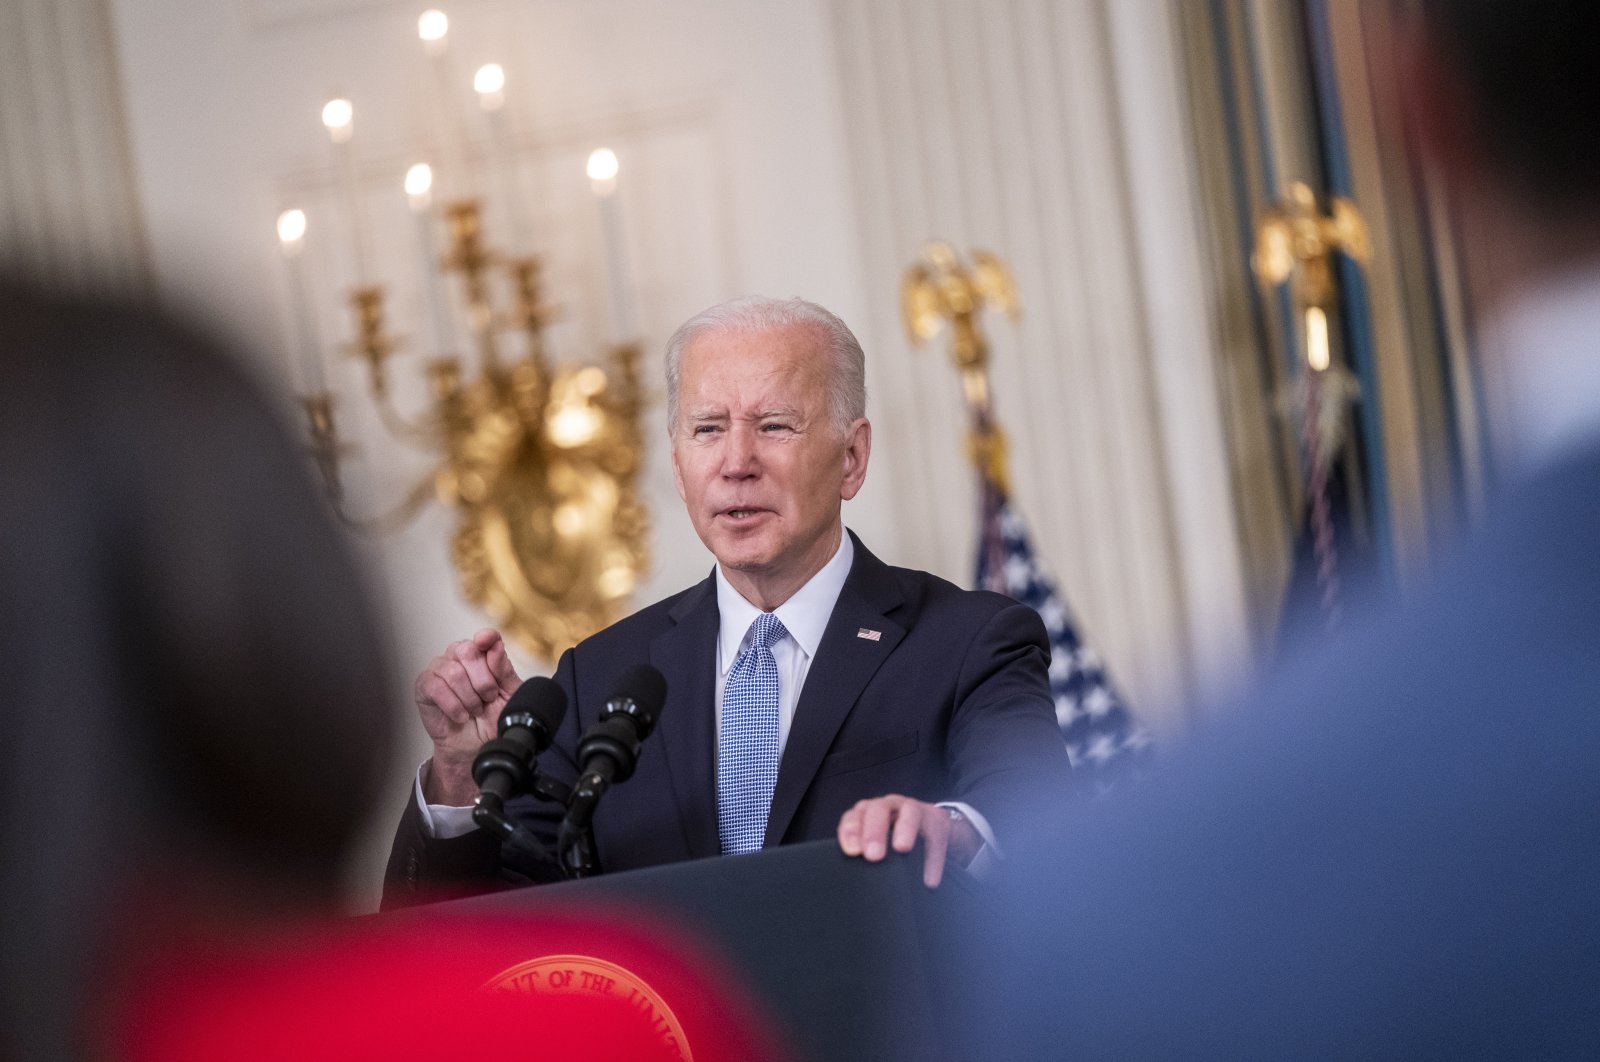 President Joe Biden delivers remarks on the March jobs report at the White House in Washington, D.C., U.S., April 1, 2022. (EPA Photo)